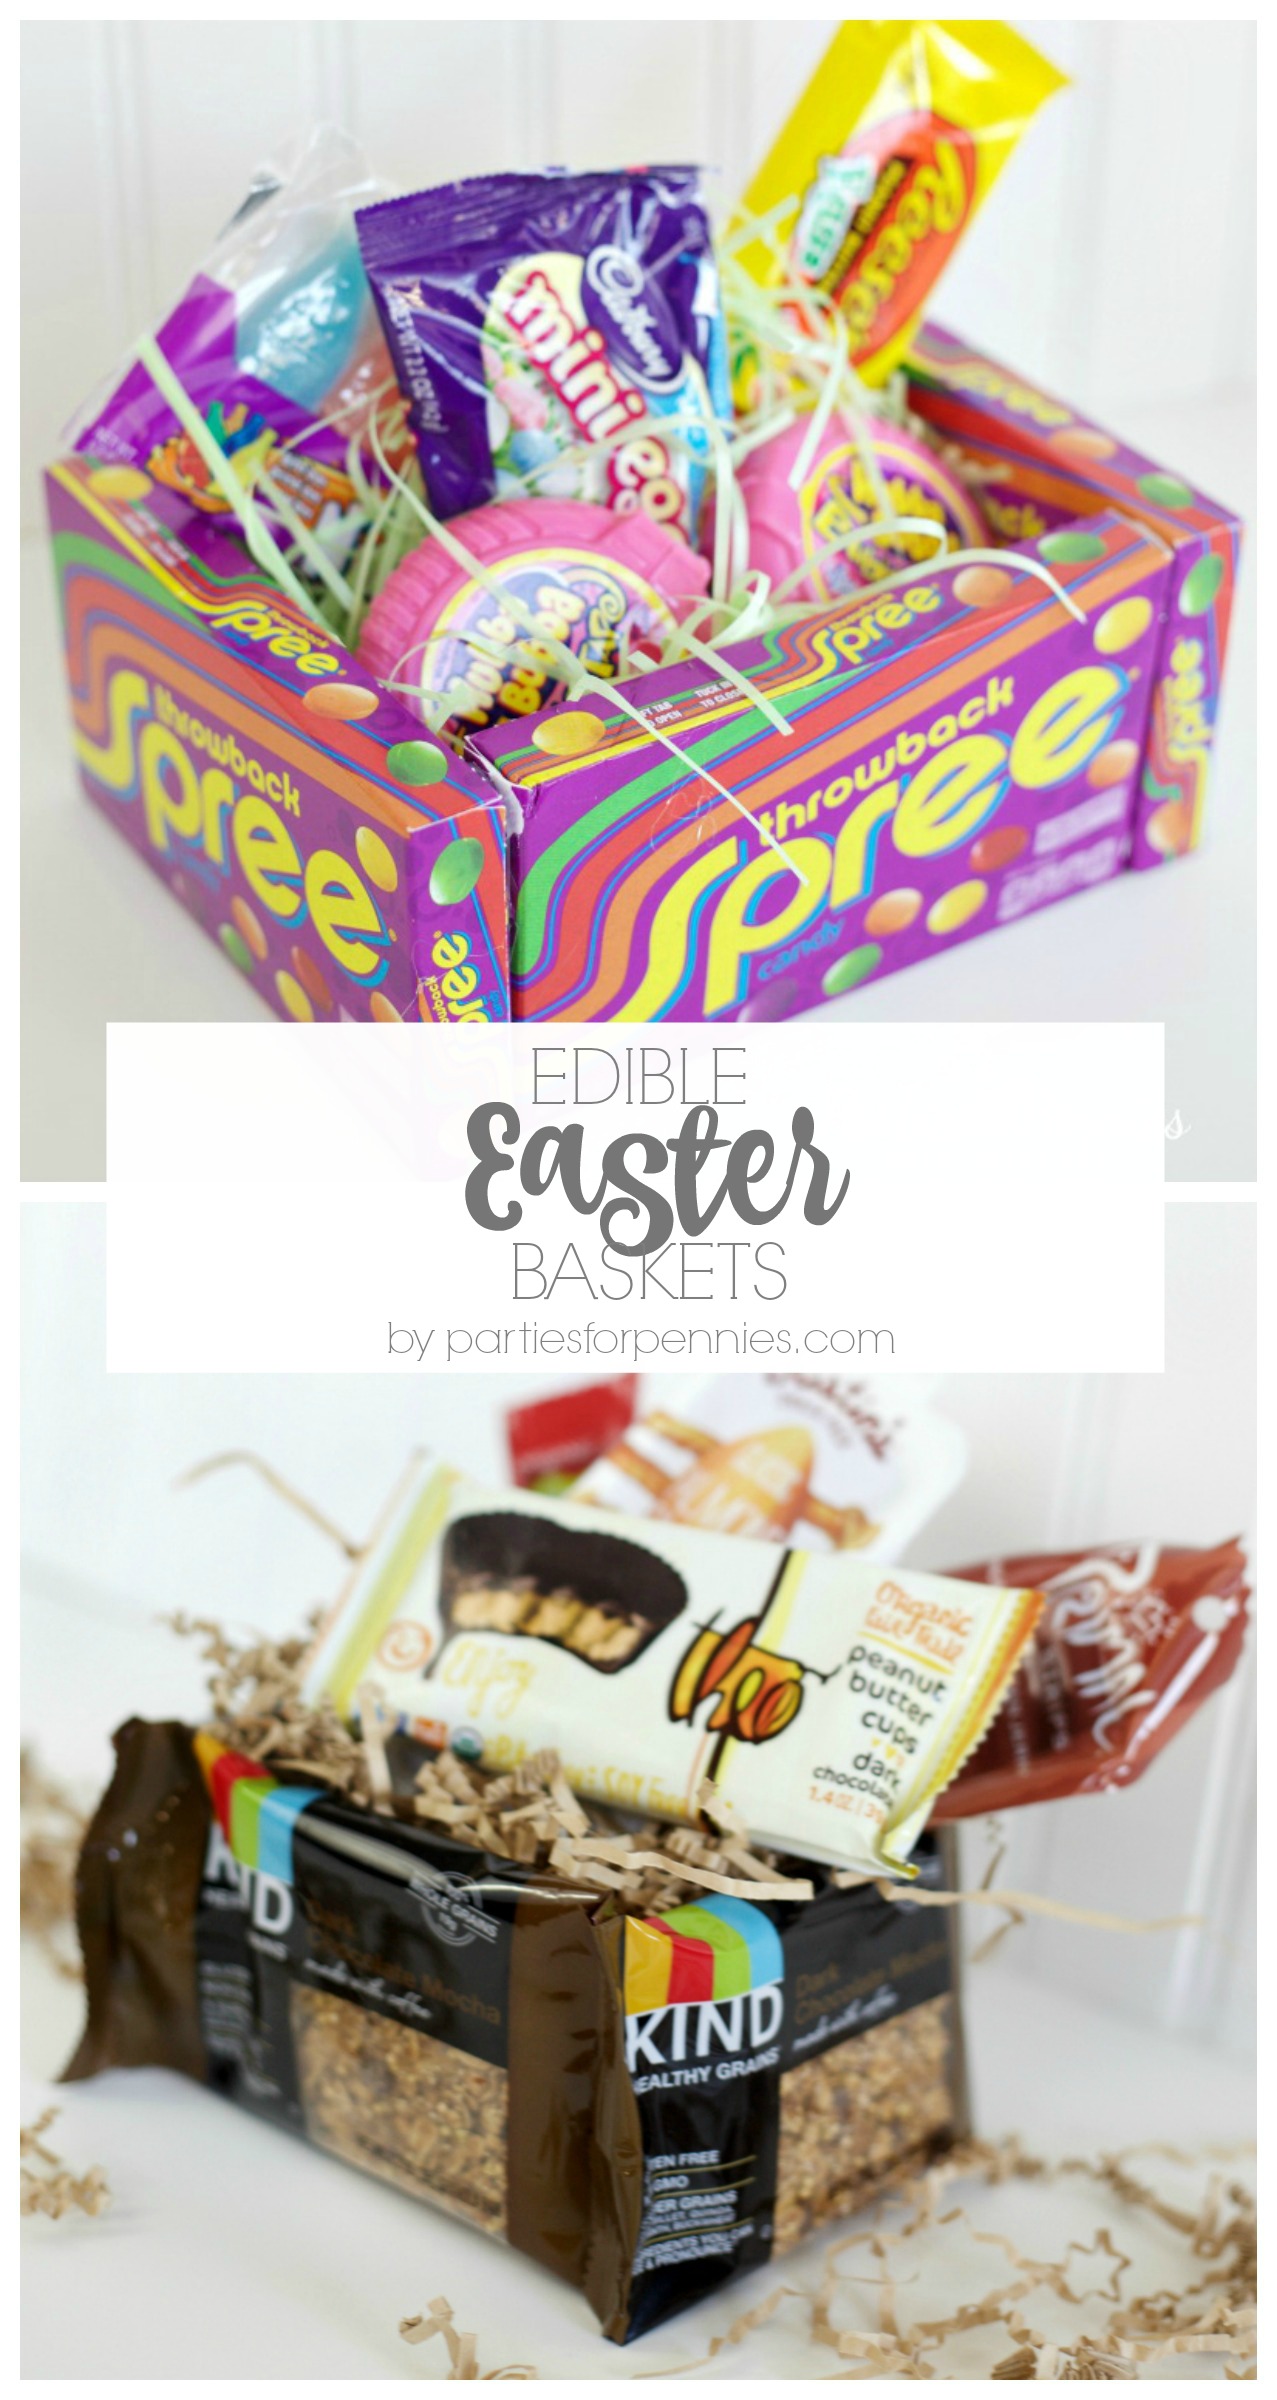 DIY Edible Easter Baskets - Parties for Pennies